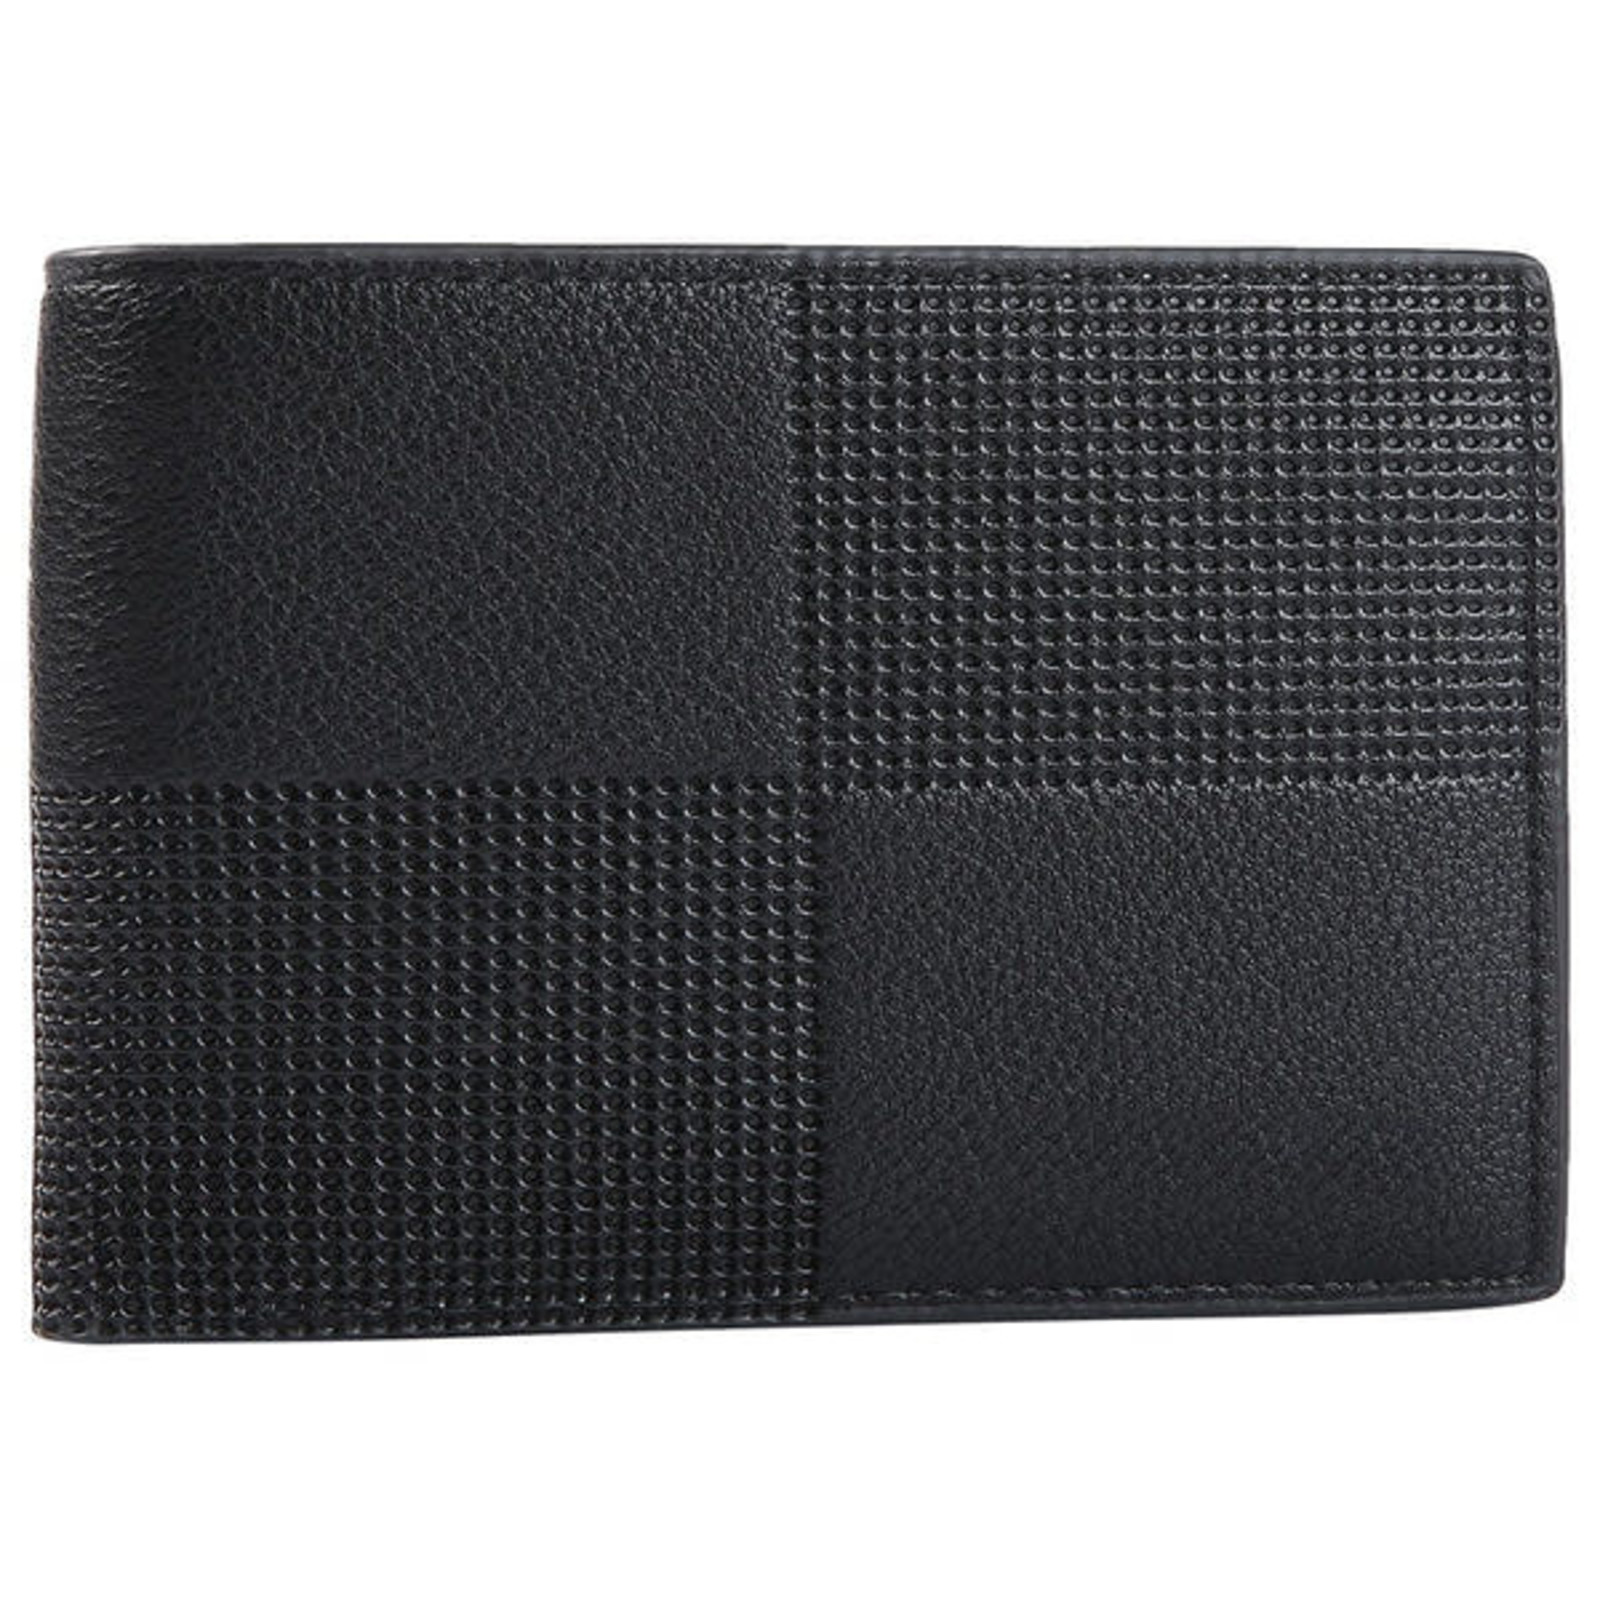 Mad Man Black  Airmail Wallet  3065a loading=